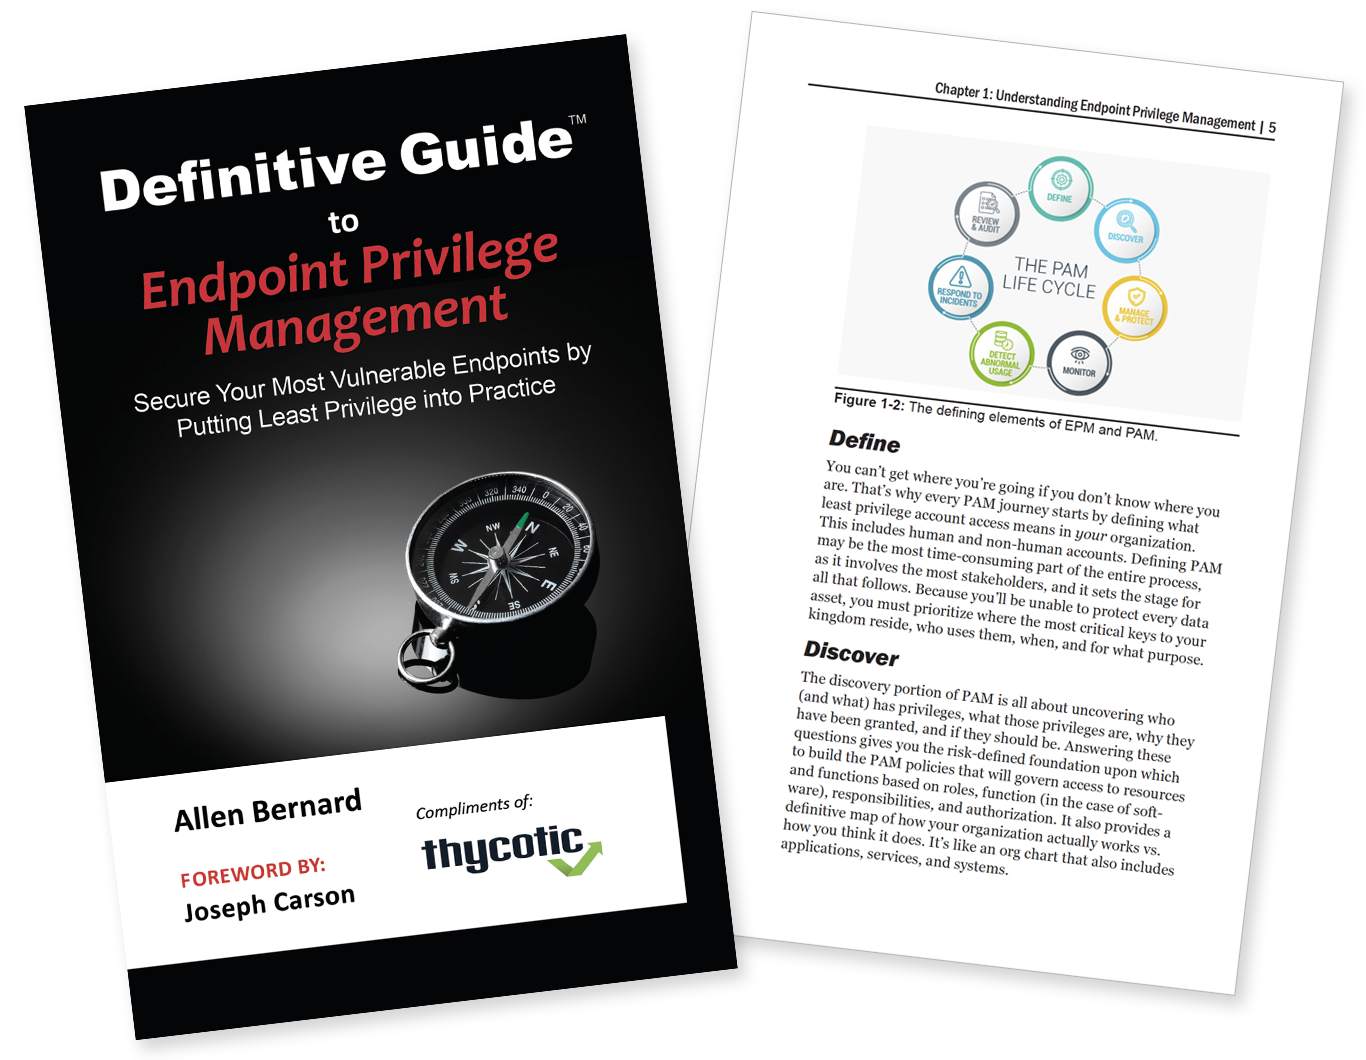 Presentation image for Definitive Guide to Endpoint Privilege Management